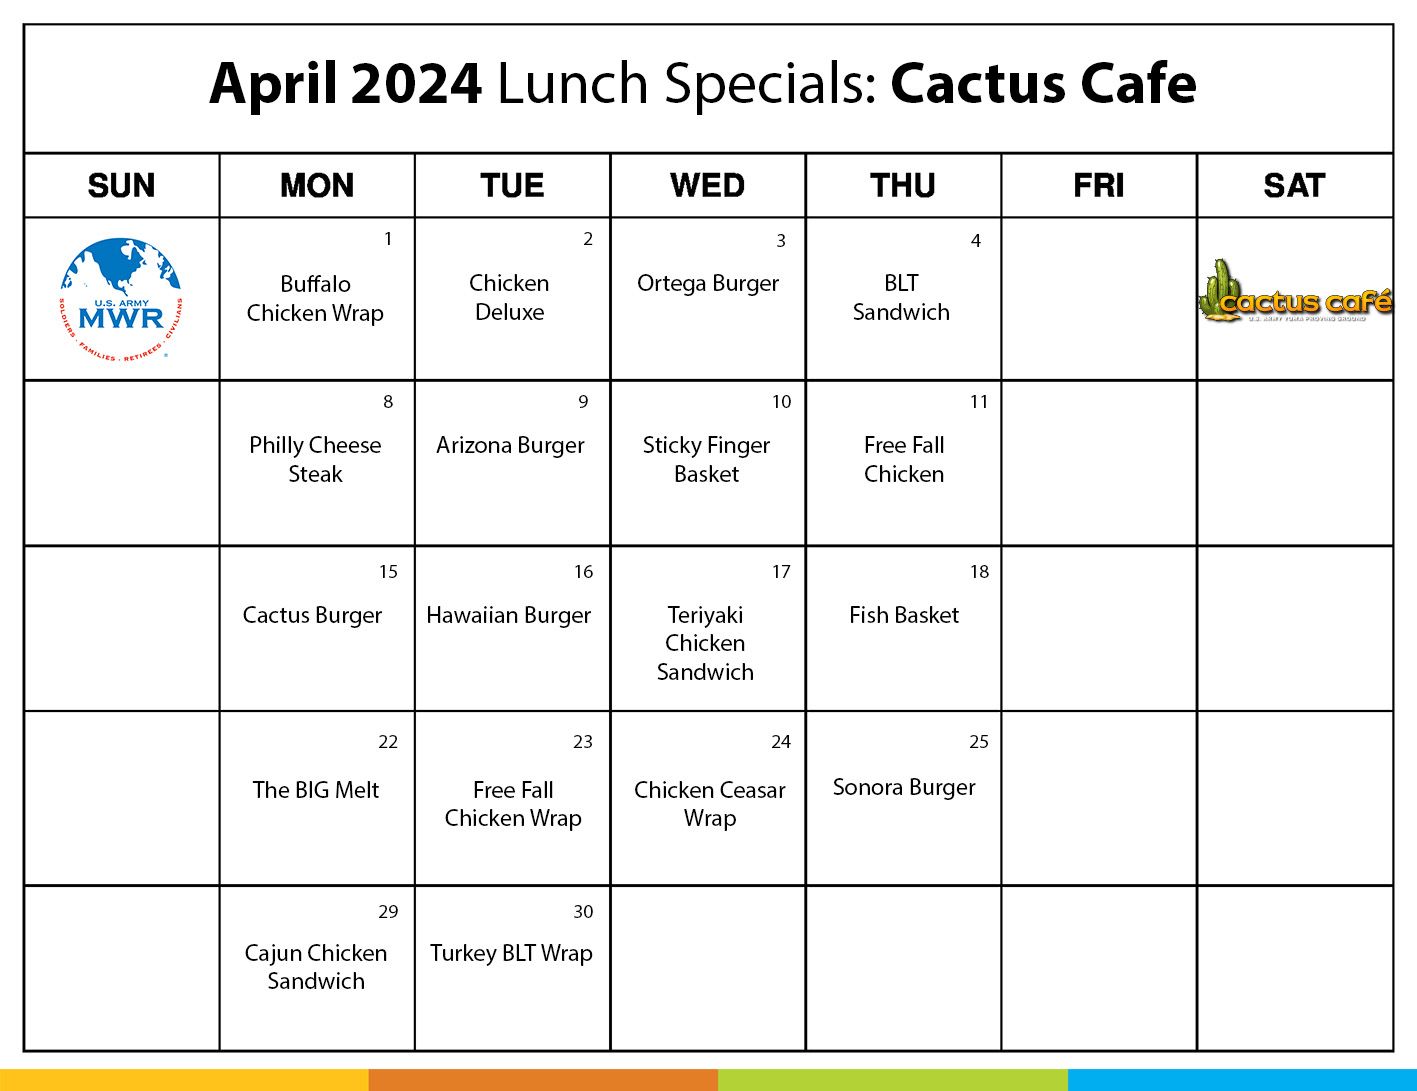 YPG_Cactus Cafe_April Lunch Special2024.jpg